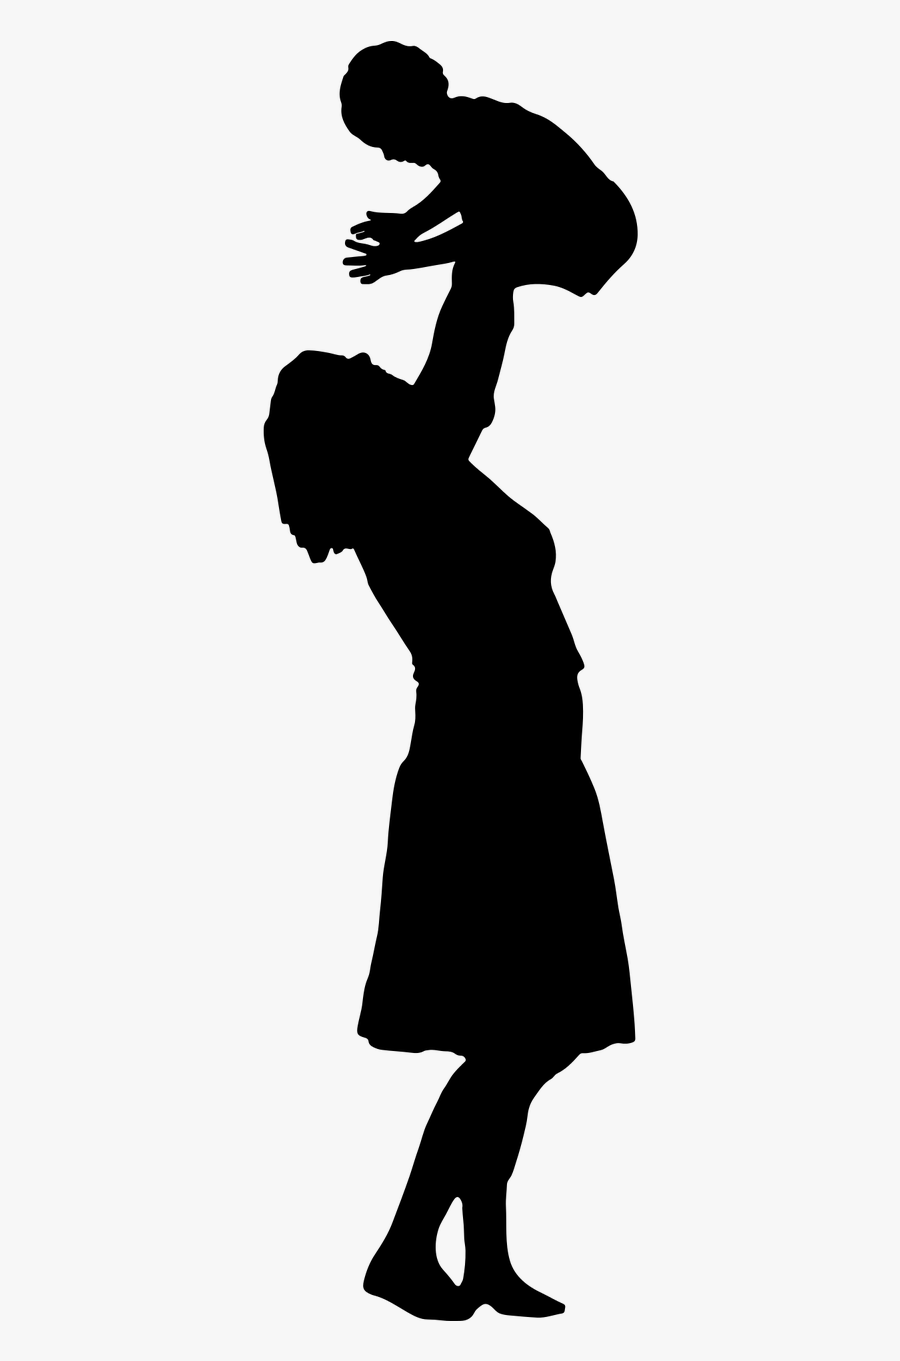 Mother Child Silhouette Clip Art - Woman Carrying A Baby Silhouette, Transparent Clipart